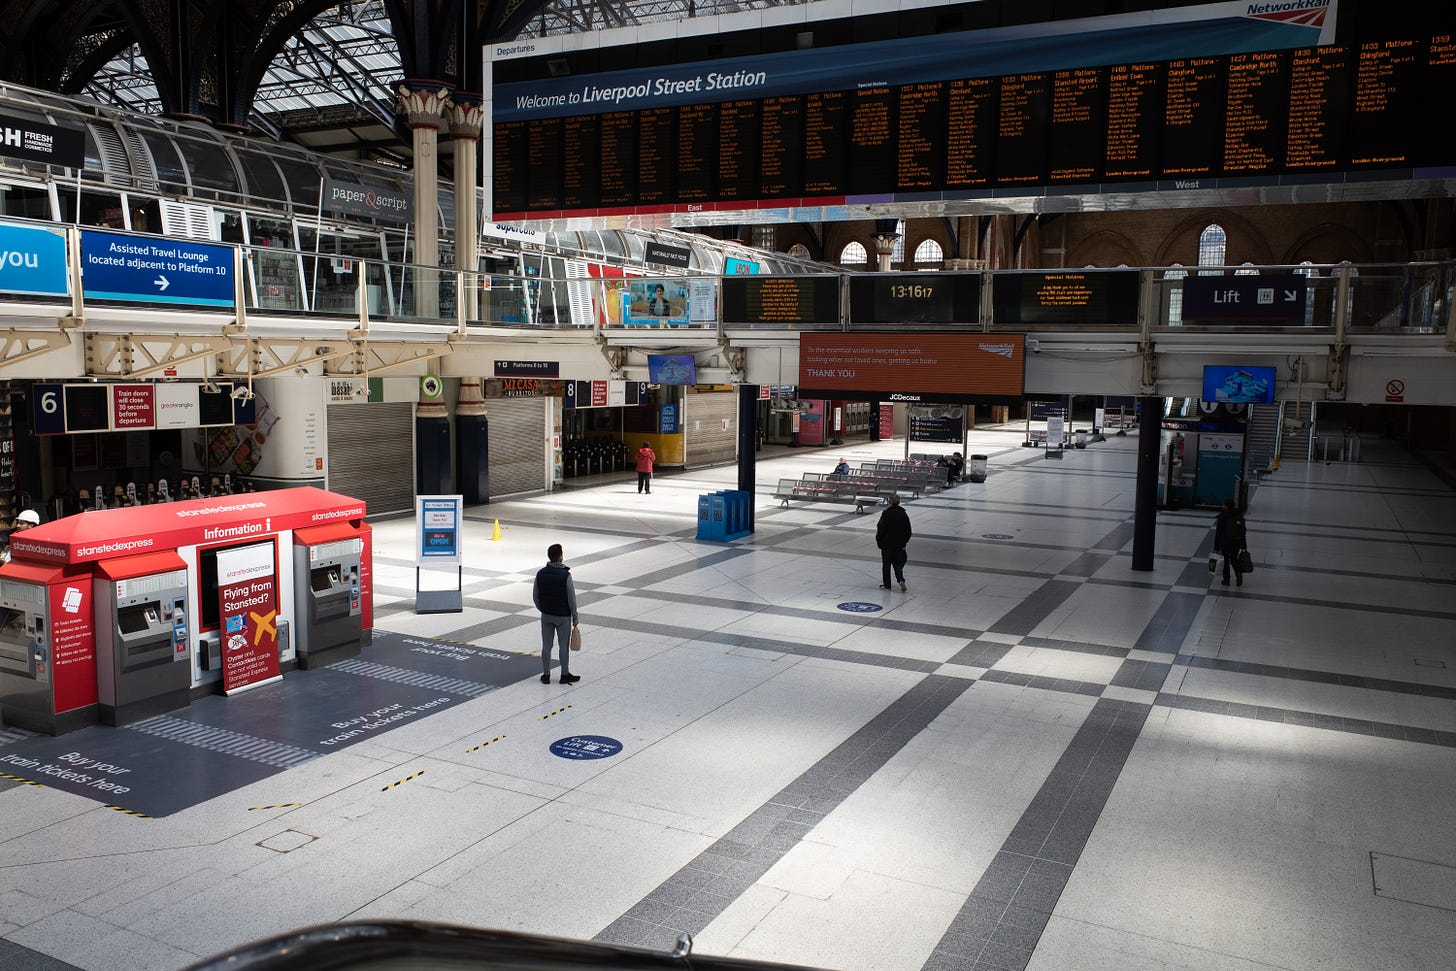 Liverpool Street station in London, empty during the COVID pandemic.